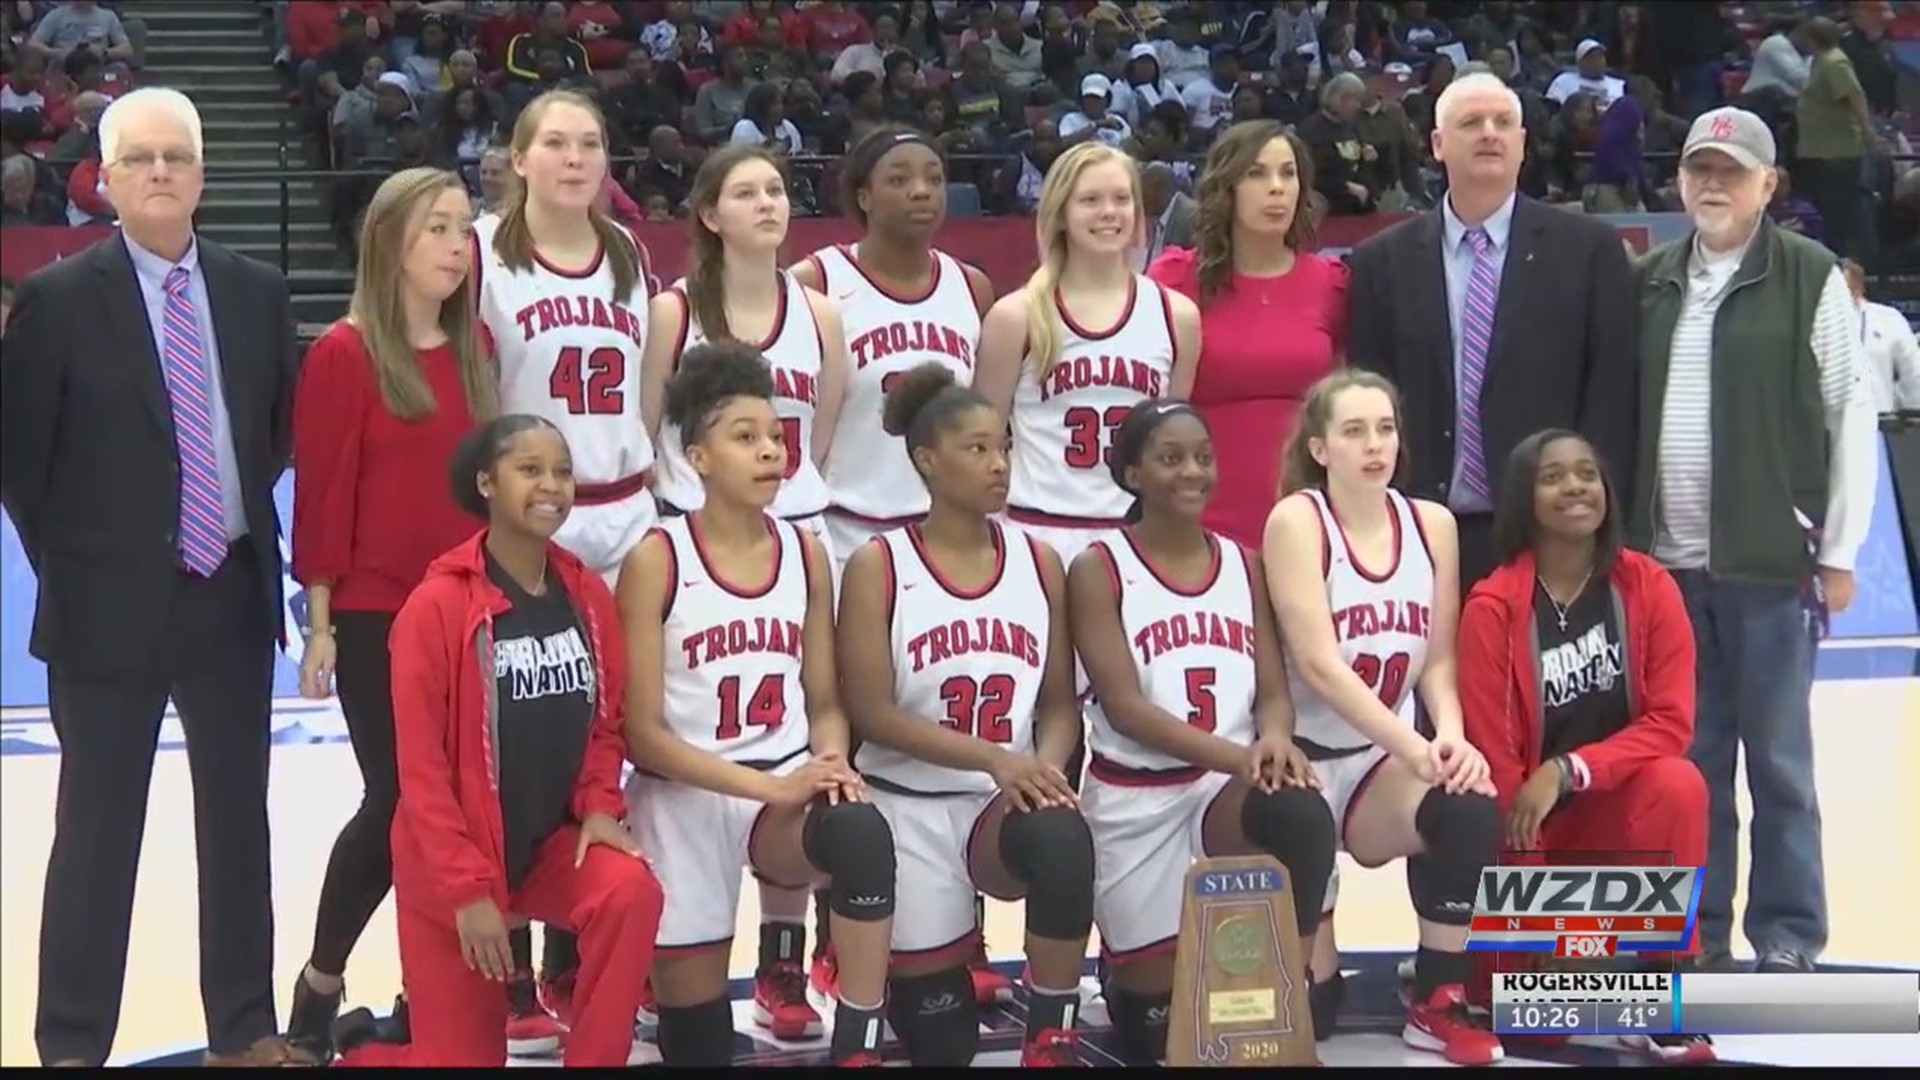 The Hazel Green Lady Trojans beat McAdory 40-34 Saturday afternoon to claim their third straight AHSAA Class 6A state girls’ basketball title.